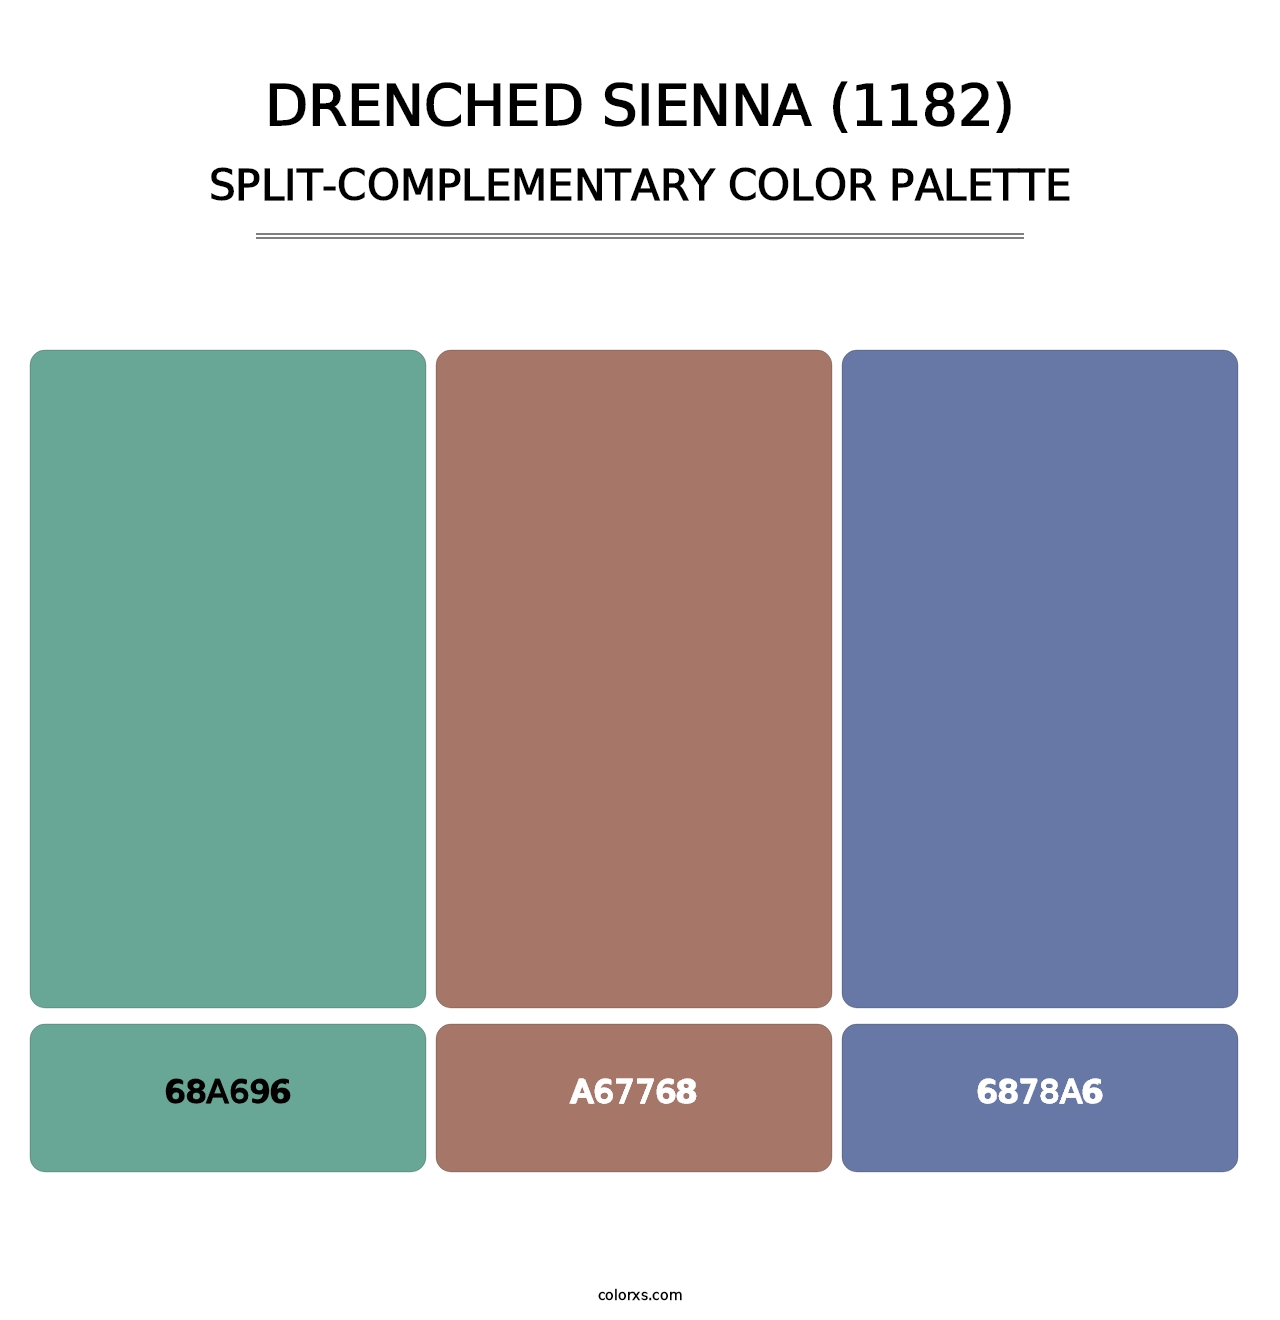 Drenched Sienna (1182) - Split-Complementary Color Palette